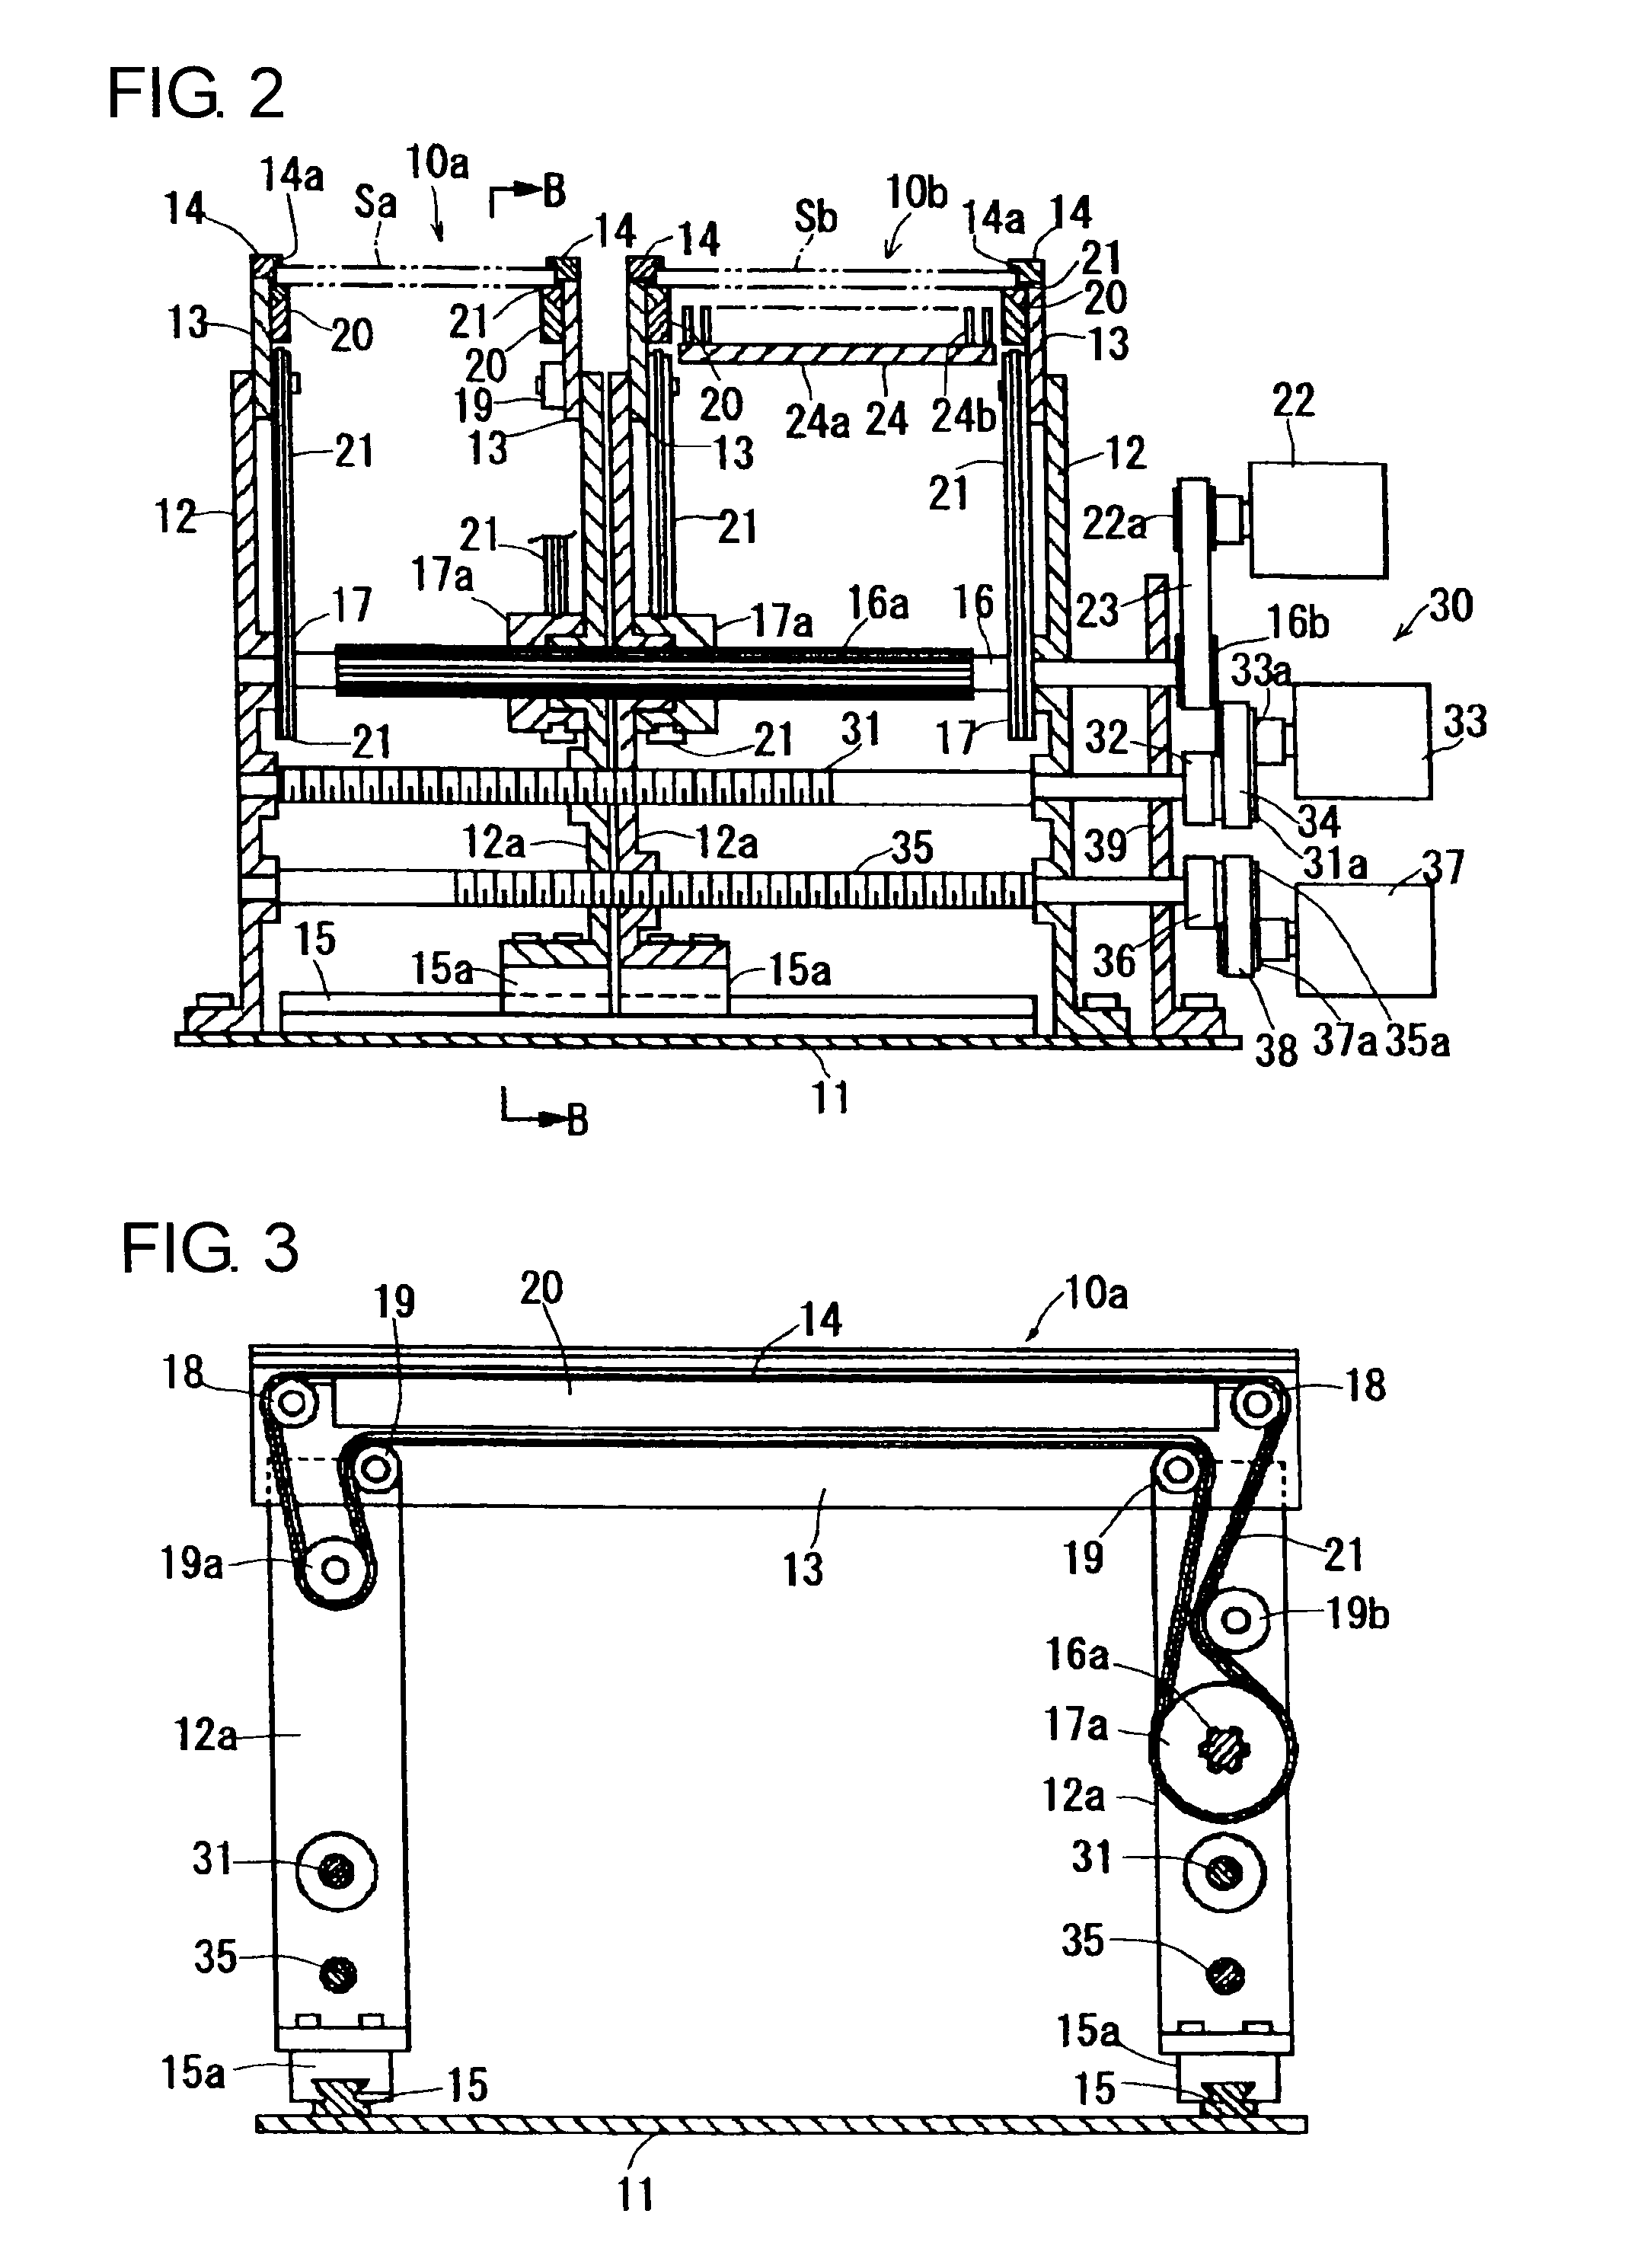 Component mounting apparatus